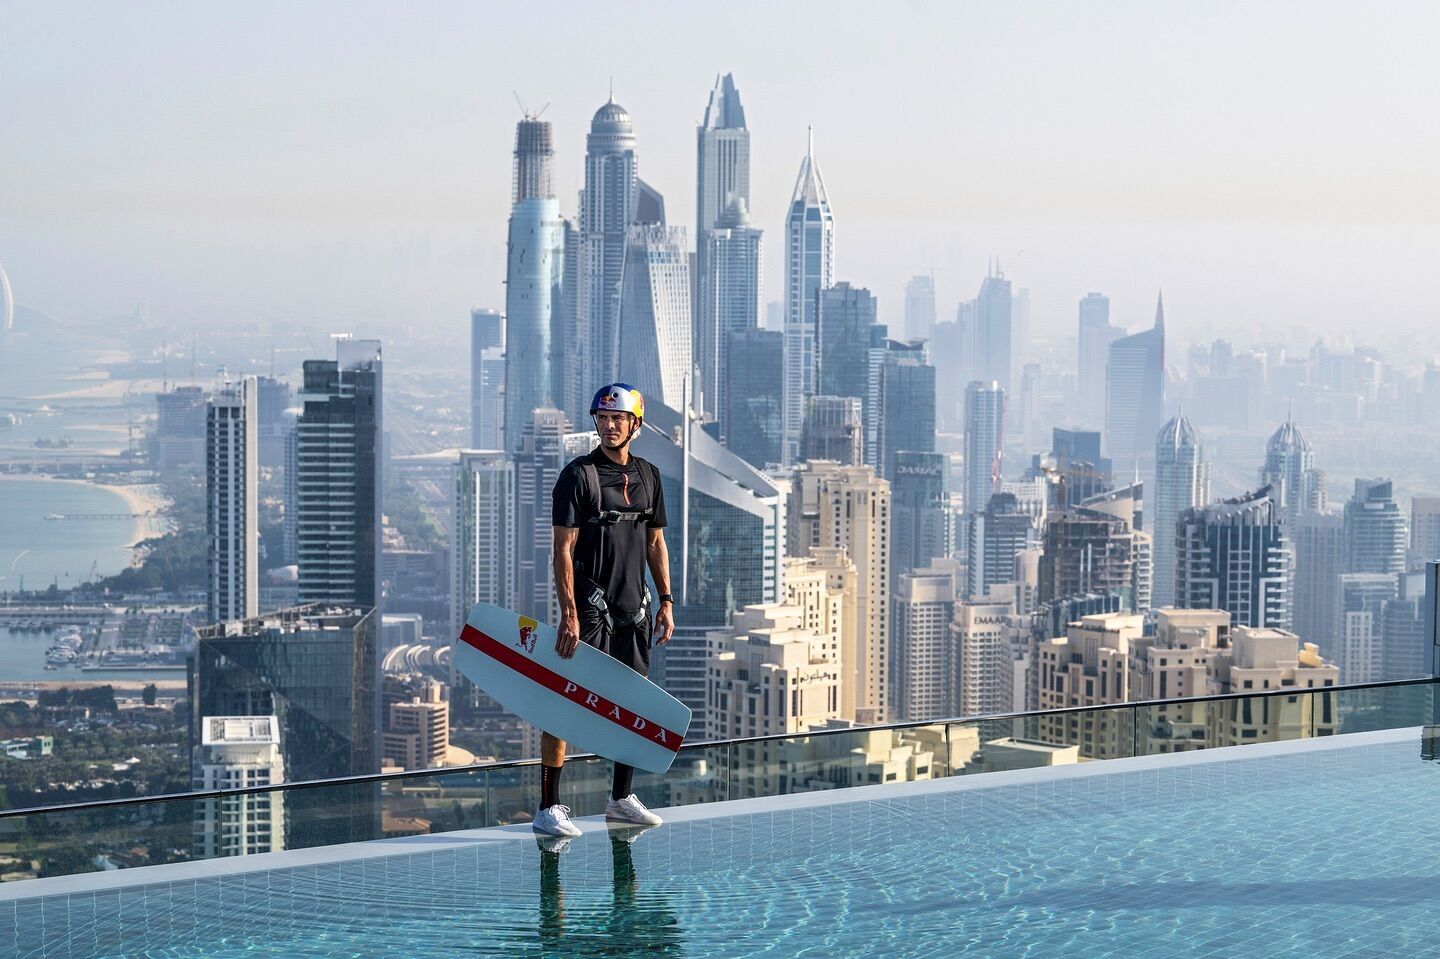 For the first time in history. The world champion performed a unique stunt by jumping out of a swimming pool on the 77th floor